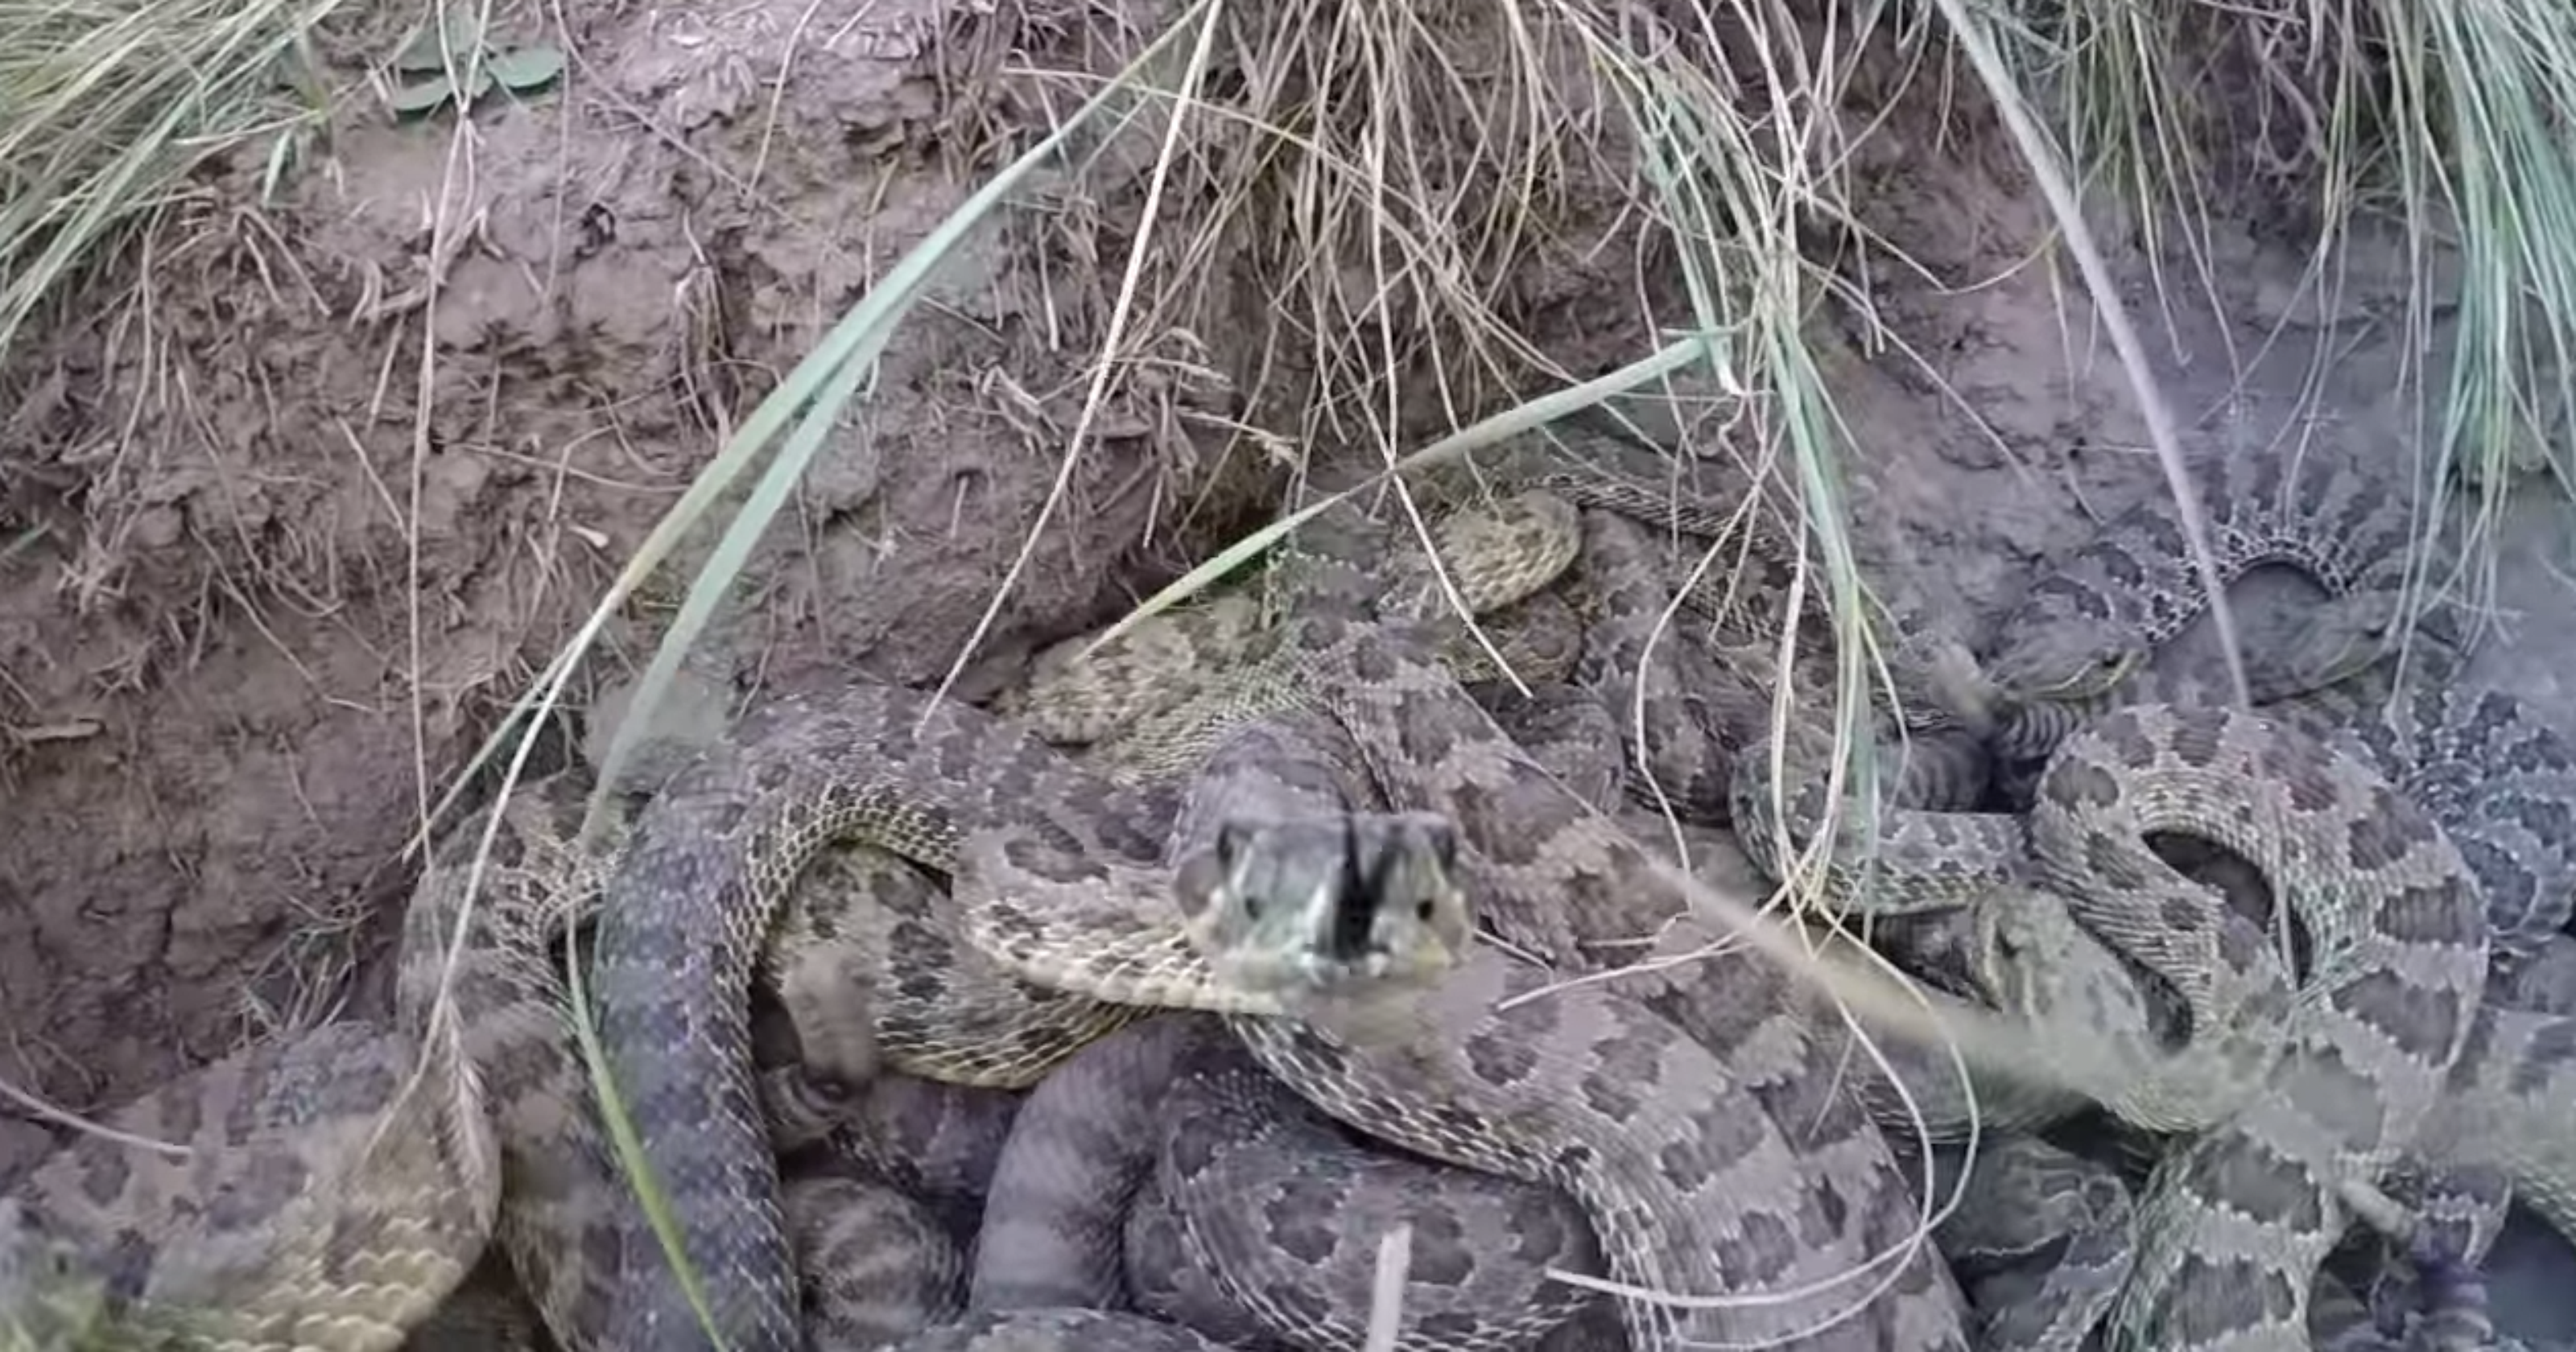 Man lowers GoPro into pit of rattlesnakes